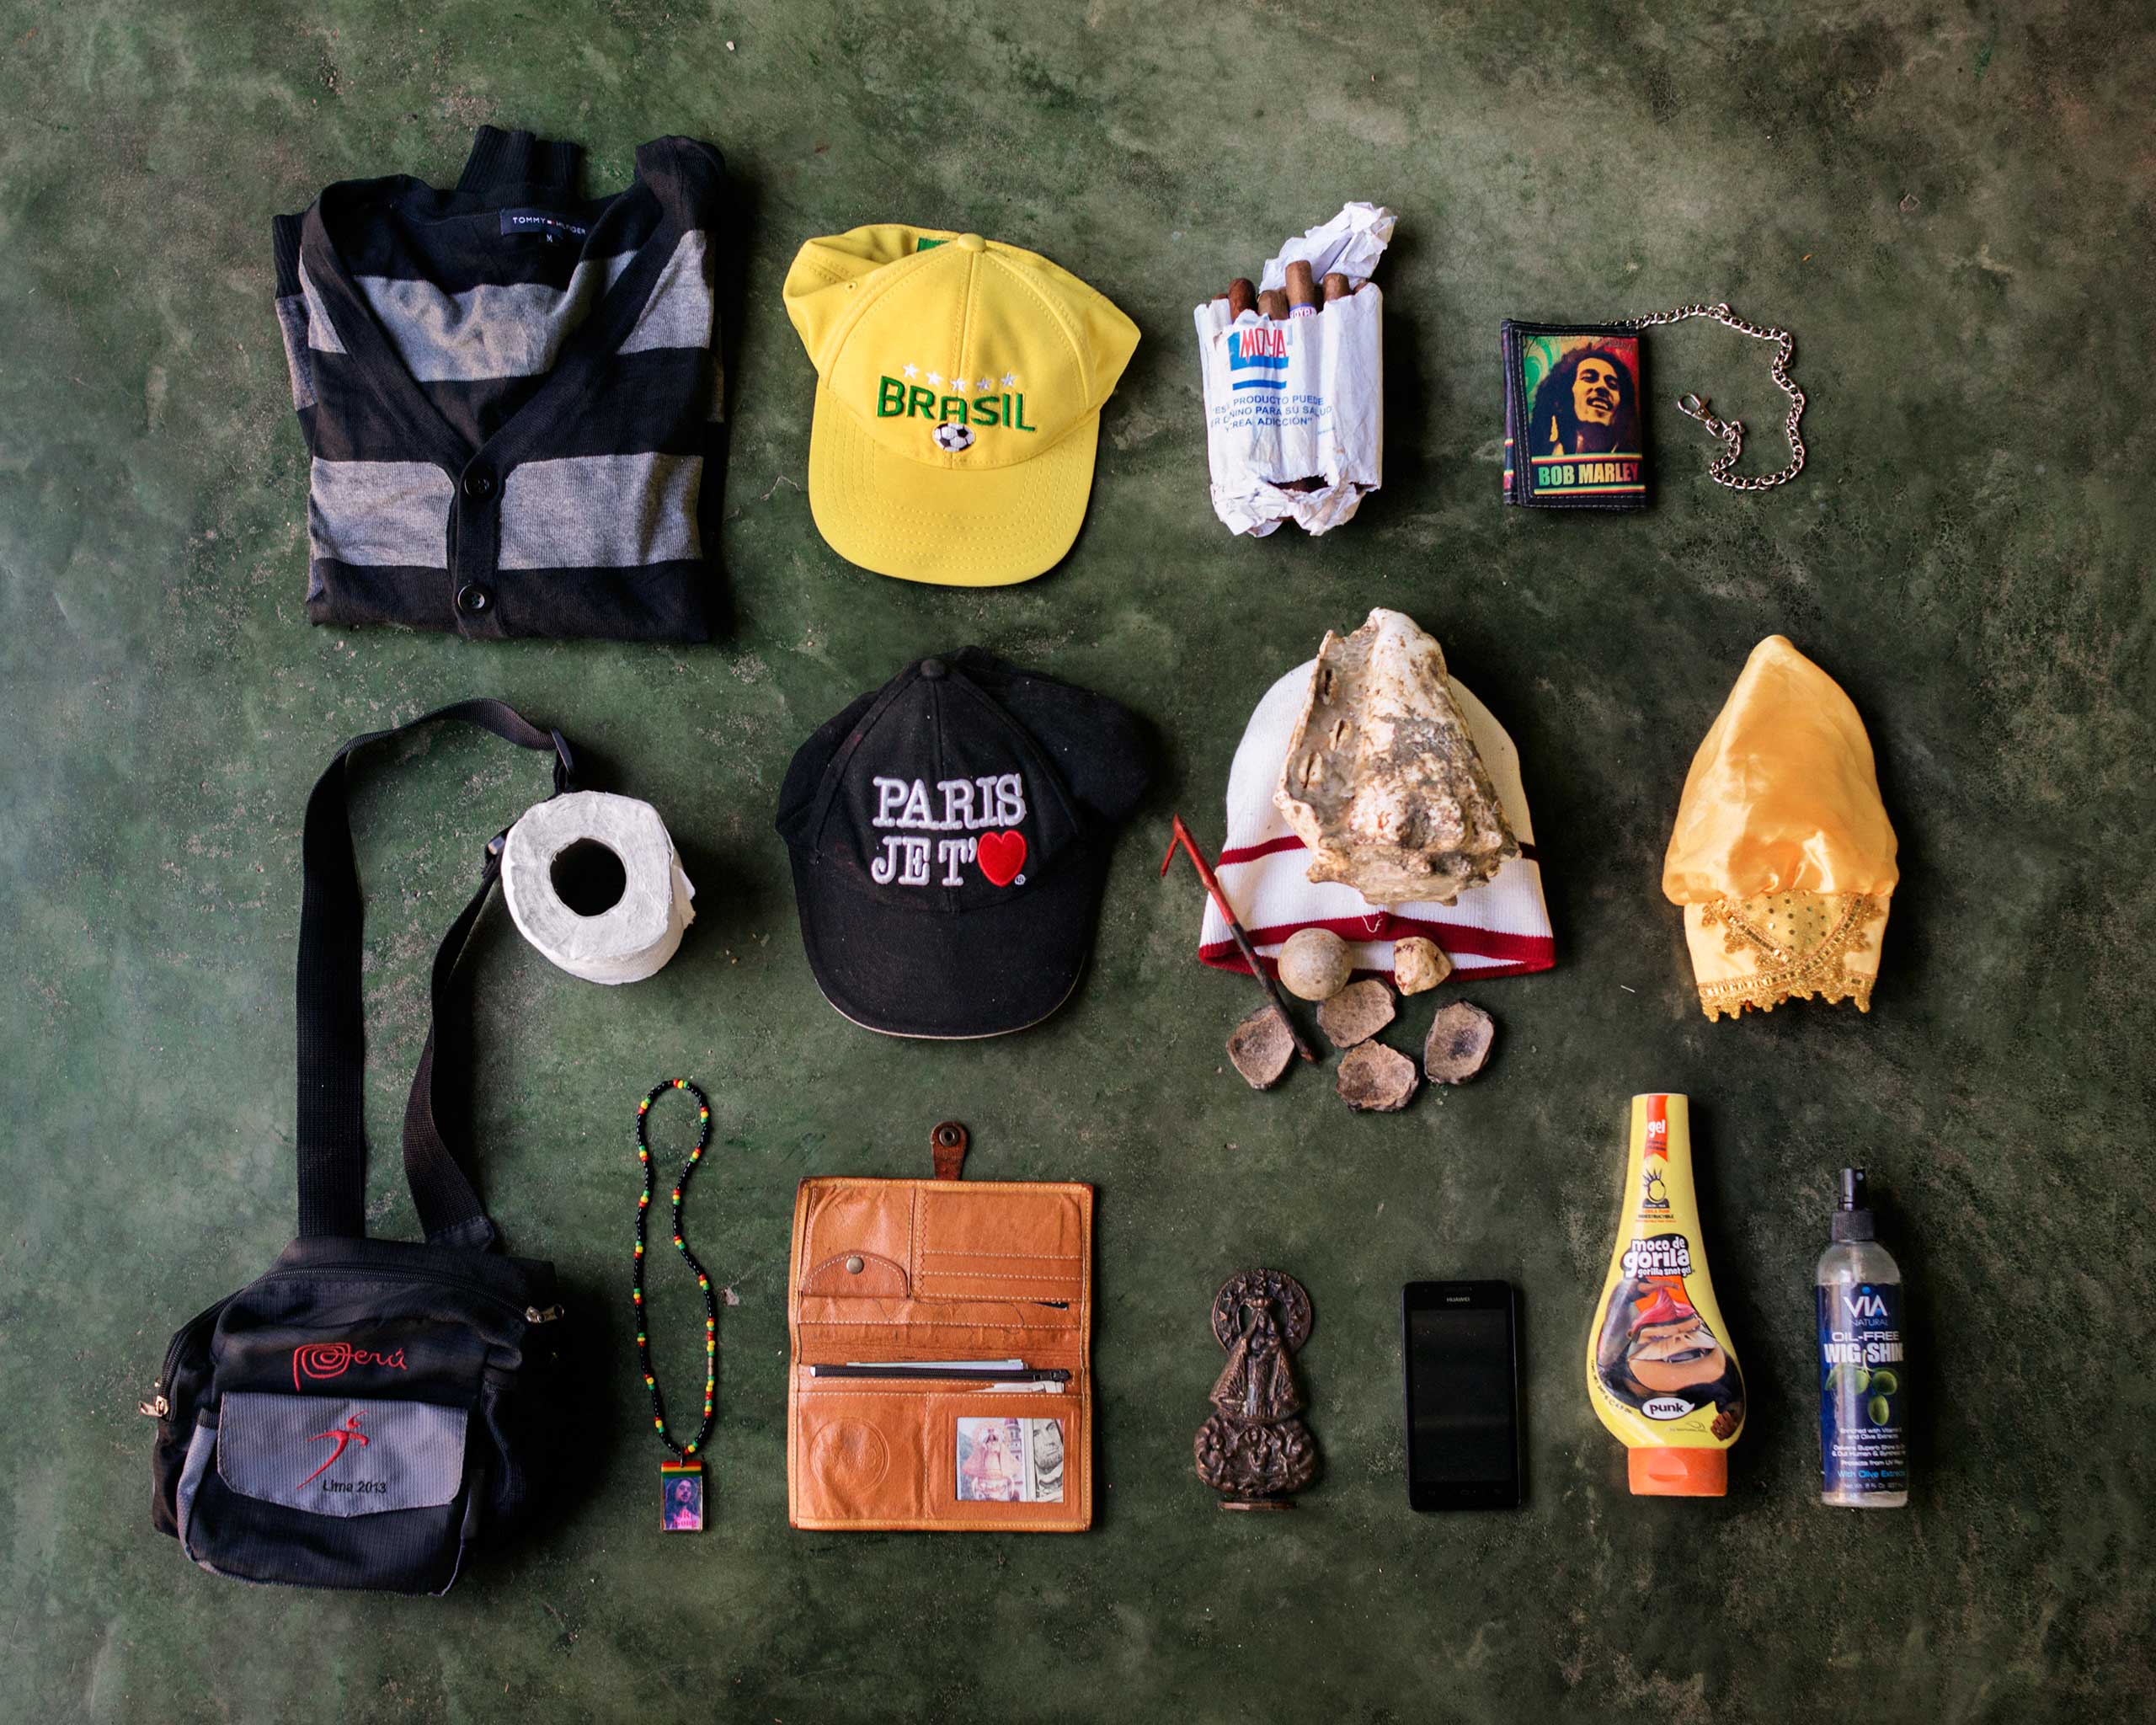 Roger Savòn Court, 40, from Cuba. He flew to Colombia and traveled illegally through South America up to Guatemala. He wants to reach the U.S. and work honestly in America. In his bag, he has a sweater, two caps, cigars, a wallet, toilet paper, a big shell talisman to guide him on the journey, a headdress, a fanny pack, a necklace, a document holder, a small Virgin Mary statue, a cell phone, hair gel and a detergent oil for the skin.